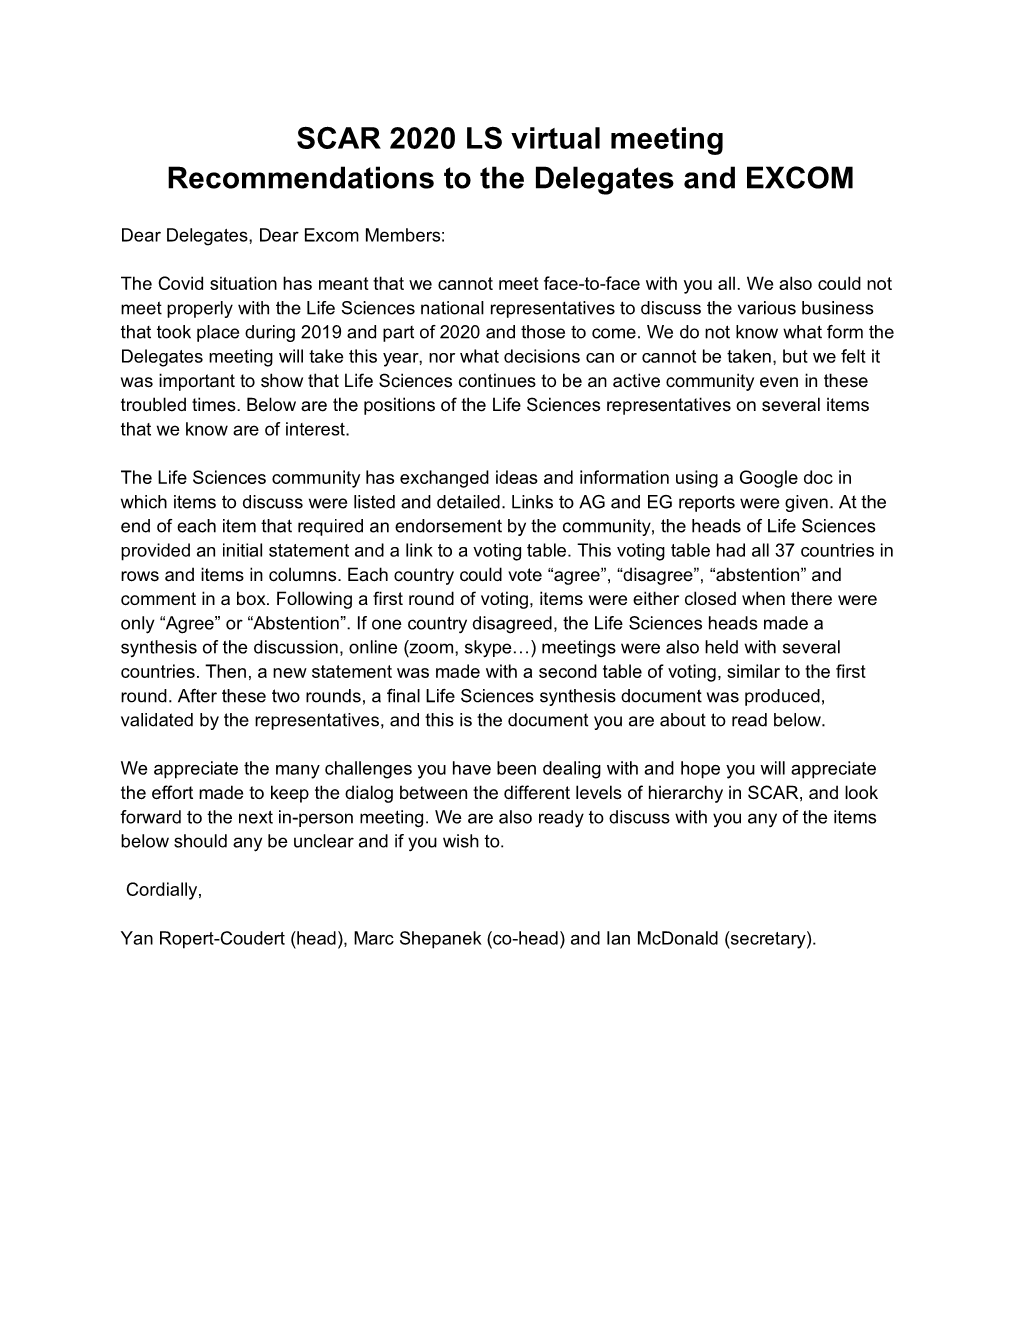 SCAR 2020 LS Virtual Meeting Recommendations to the Delegates and EXCOM